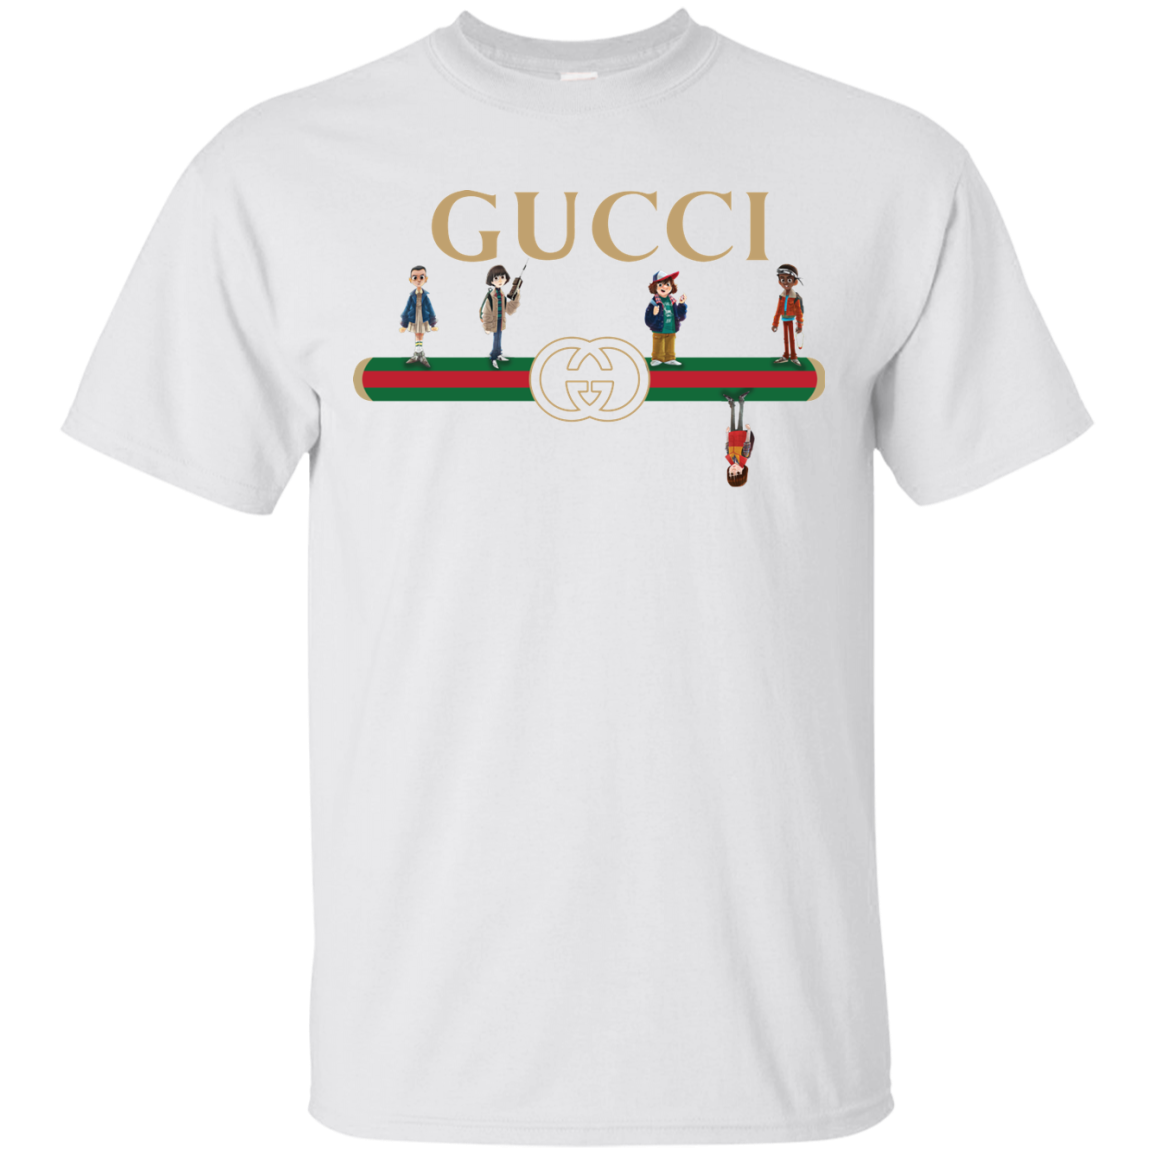 cheap things from gucci